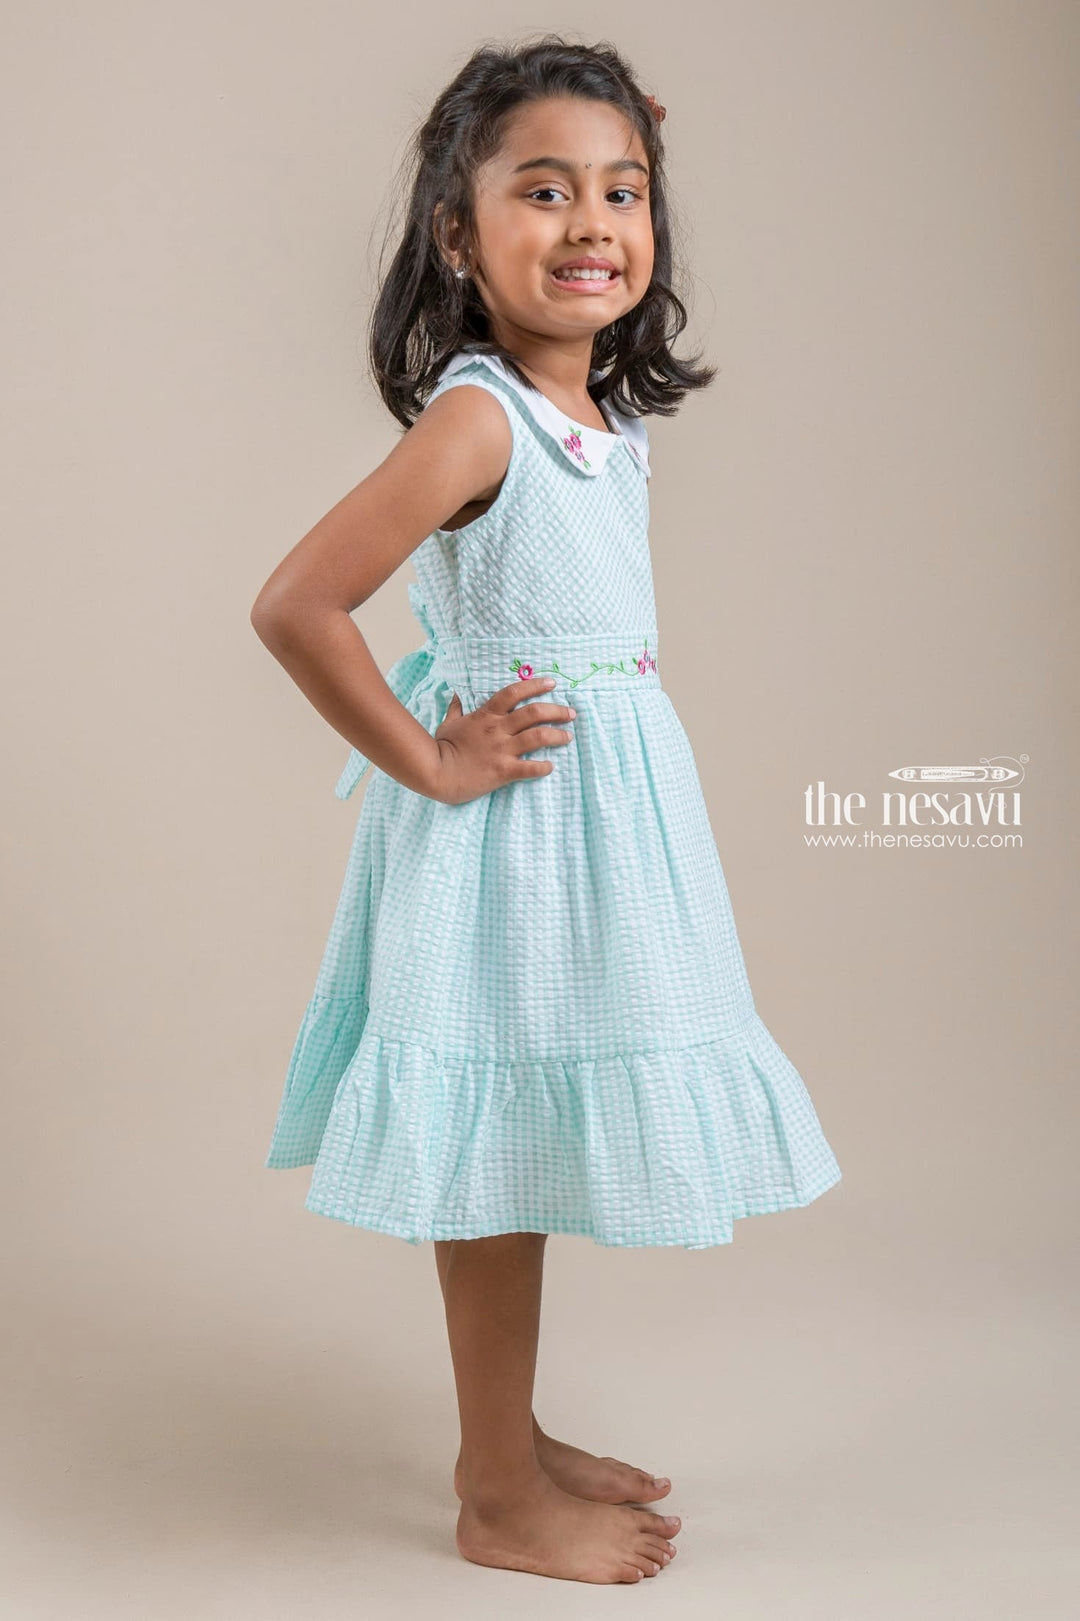 The Nesavu Girls Cotton Frock Cute Peter Pan Collared Chekered Pattern Turquoise Girls Frock With Floral Embroidered Design Nesavu Girls Cotton Frock Online | Casual Wear For Girls | The Nesavu